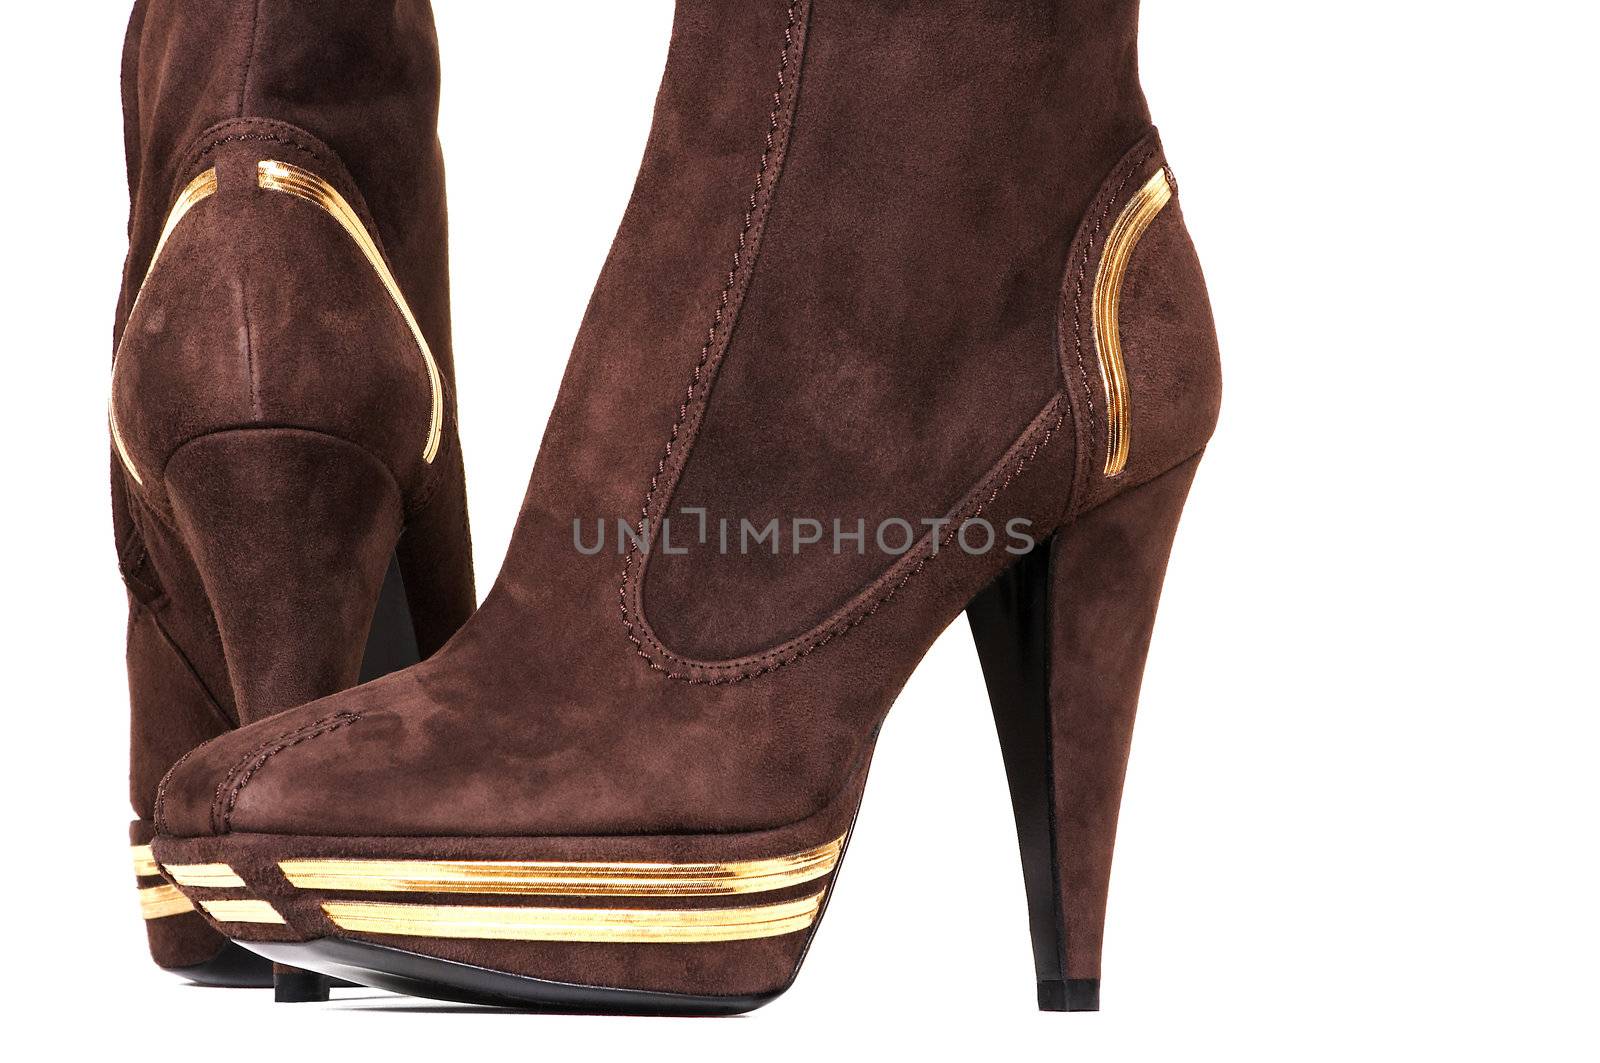 Fashionable female boots on a white background